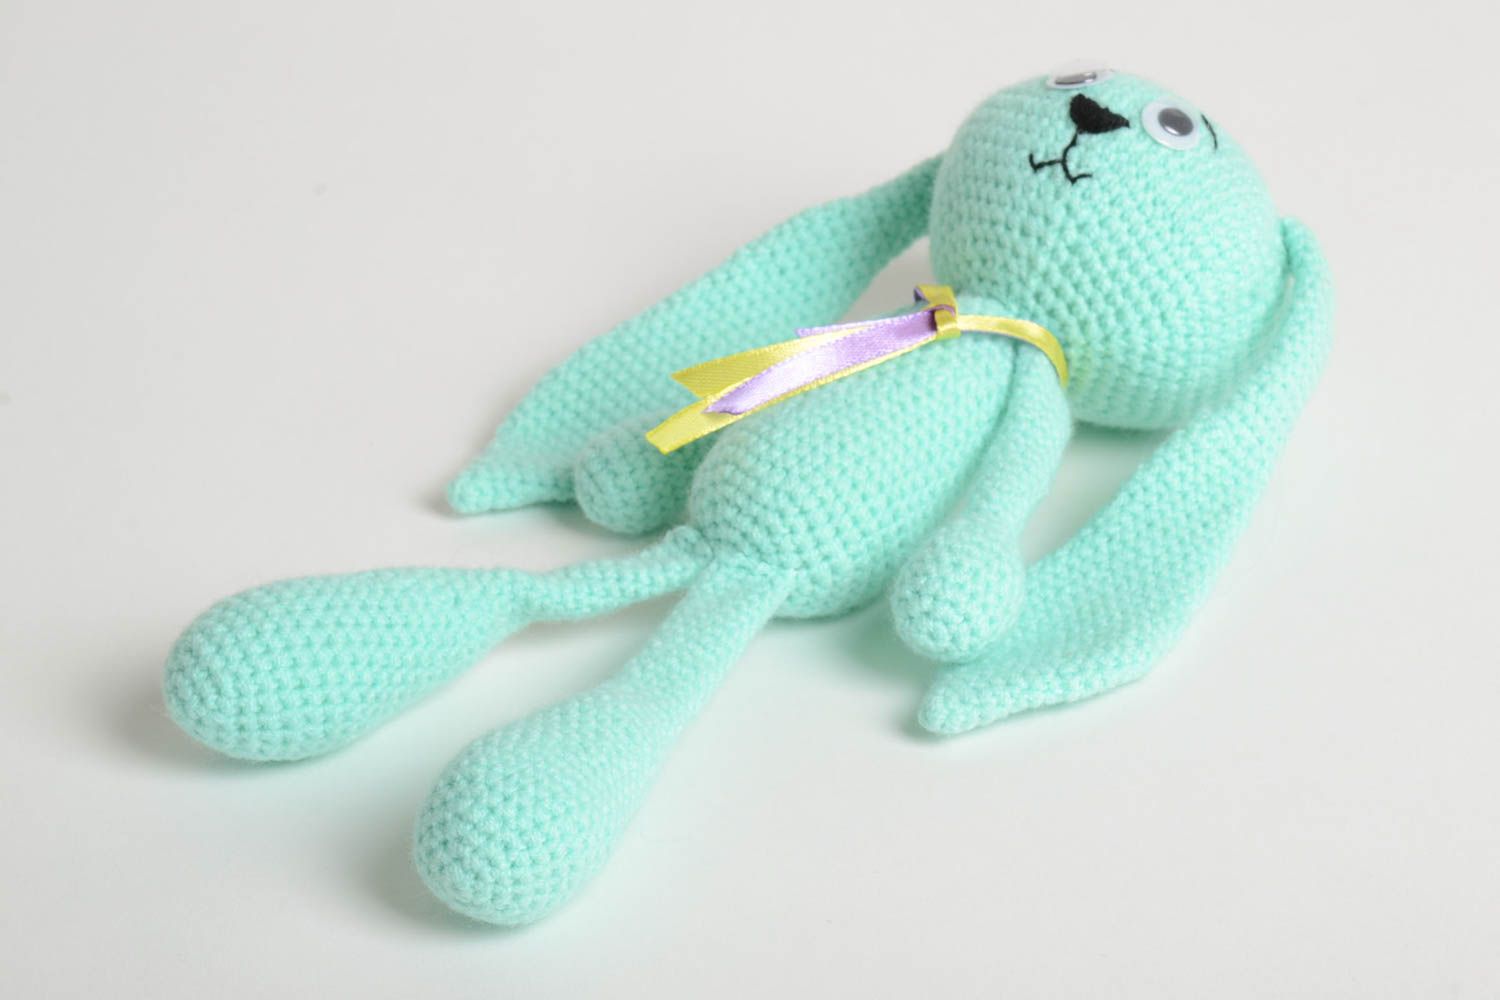 Beautiful handmade crochet soft toy stuffed toy best toys for kids gift ideas photo 4